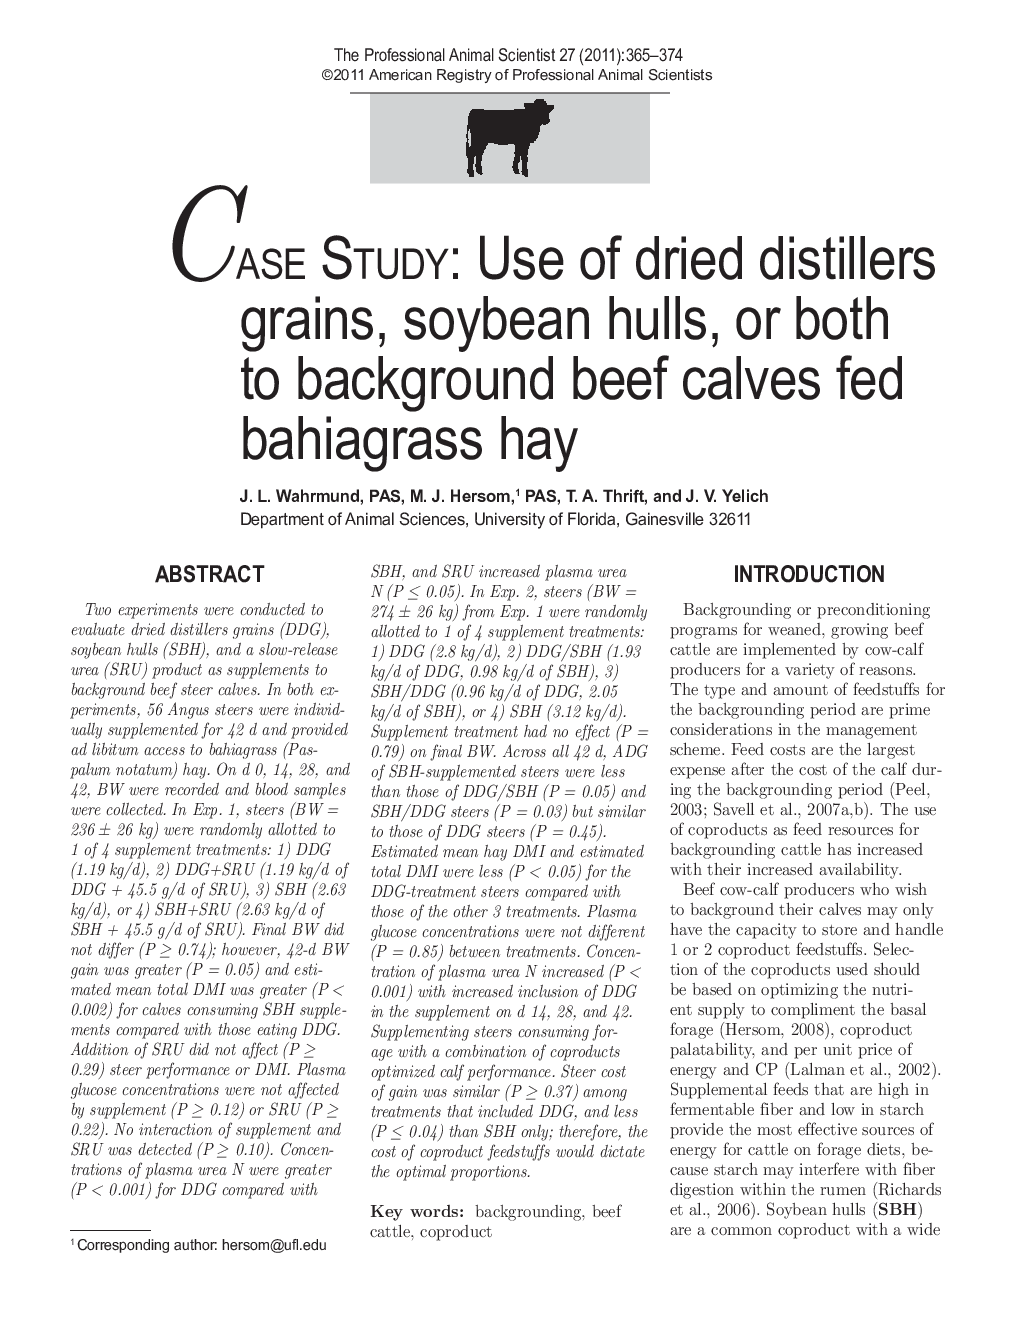 CASE STUDY: Use of dried distillers grains, soybean hulls, or both to background beef calves fed bahiagrass hay